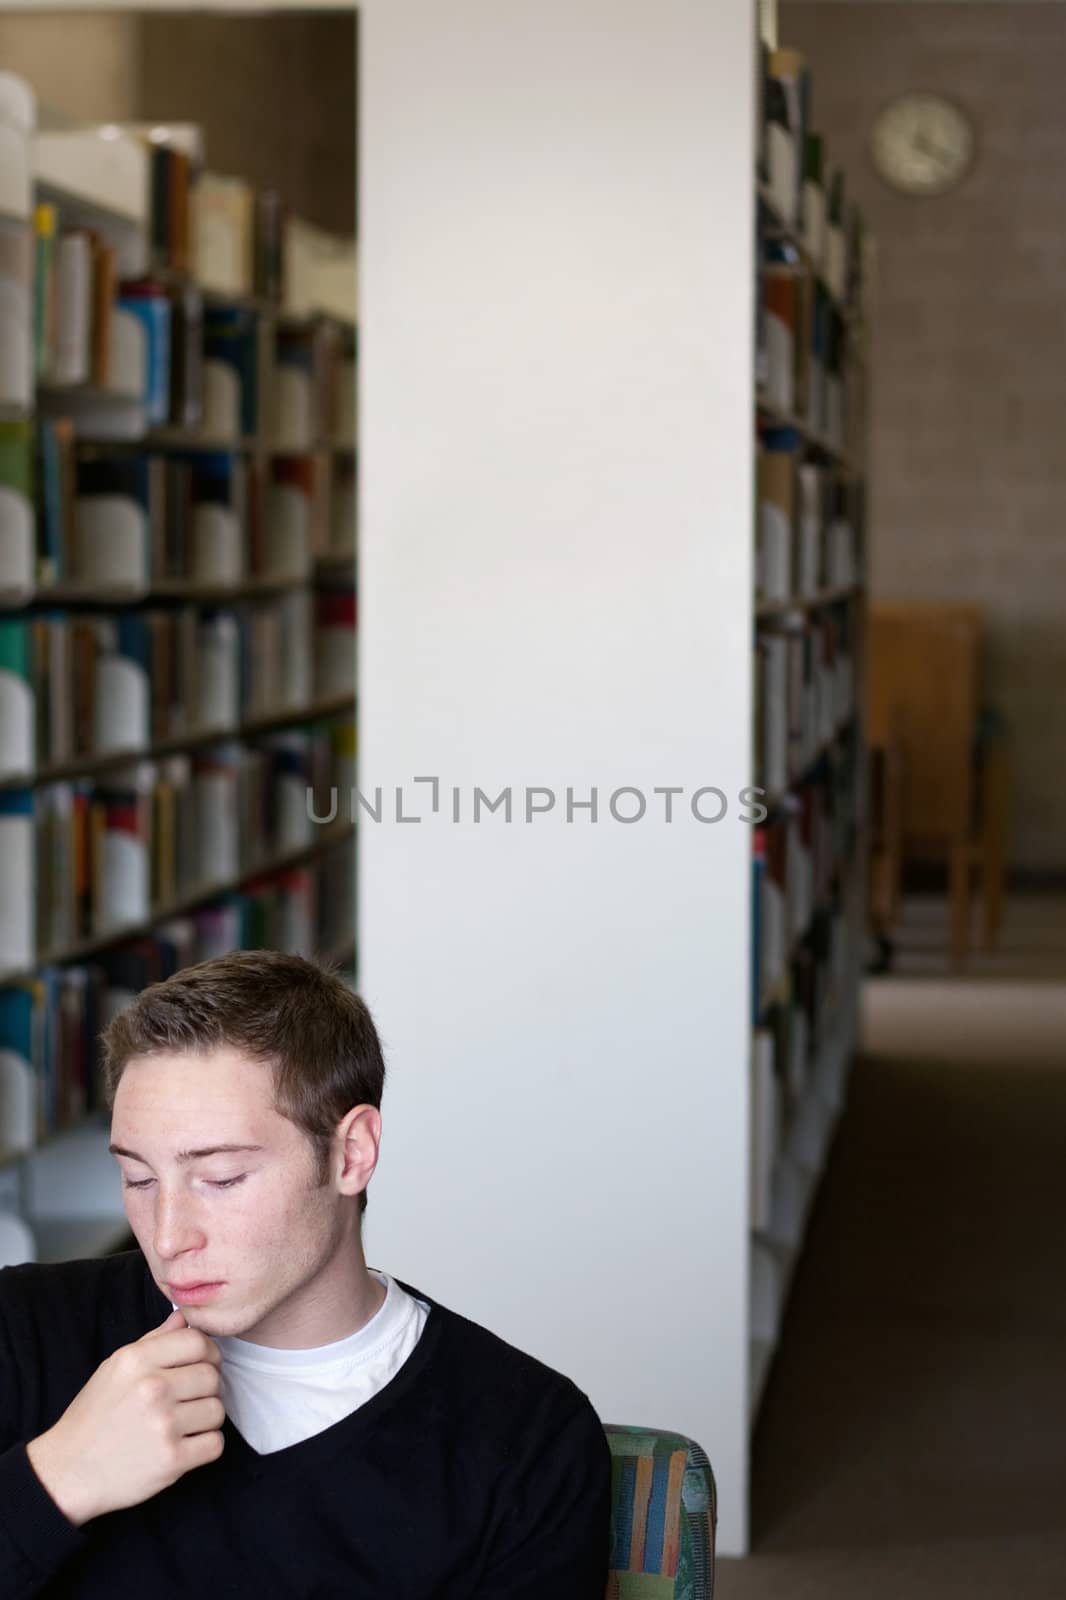 A young university student thinking about something or reading in the library with a wall clock visable in the background.